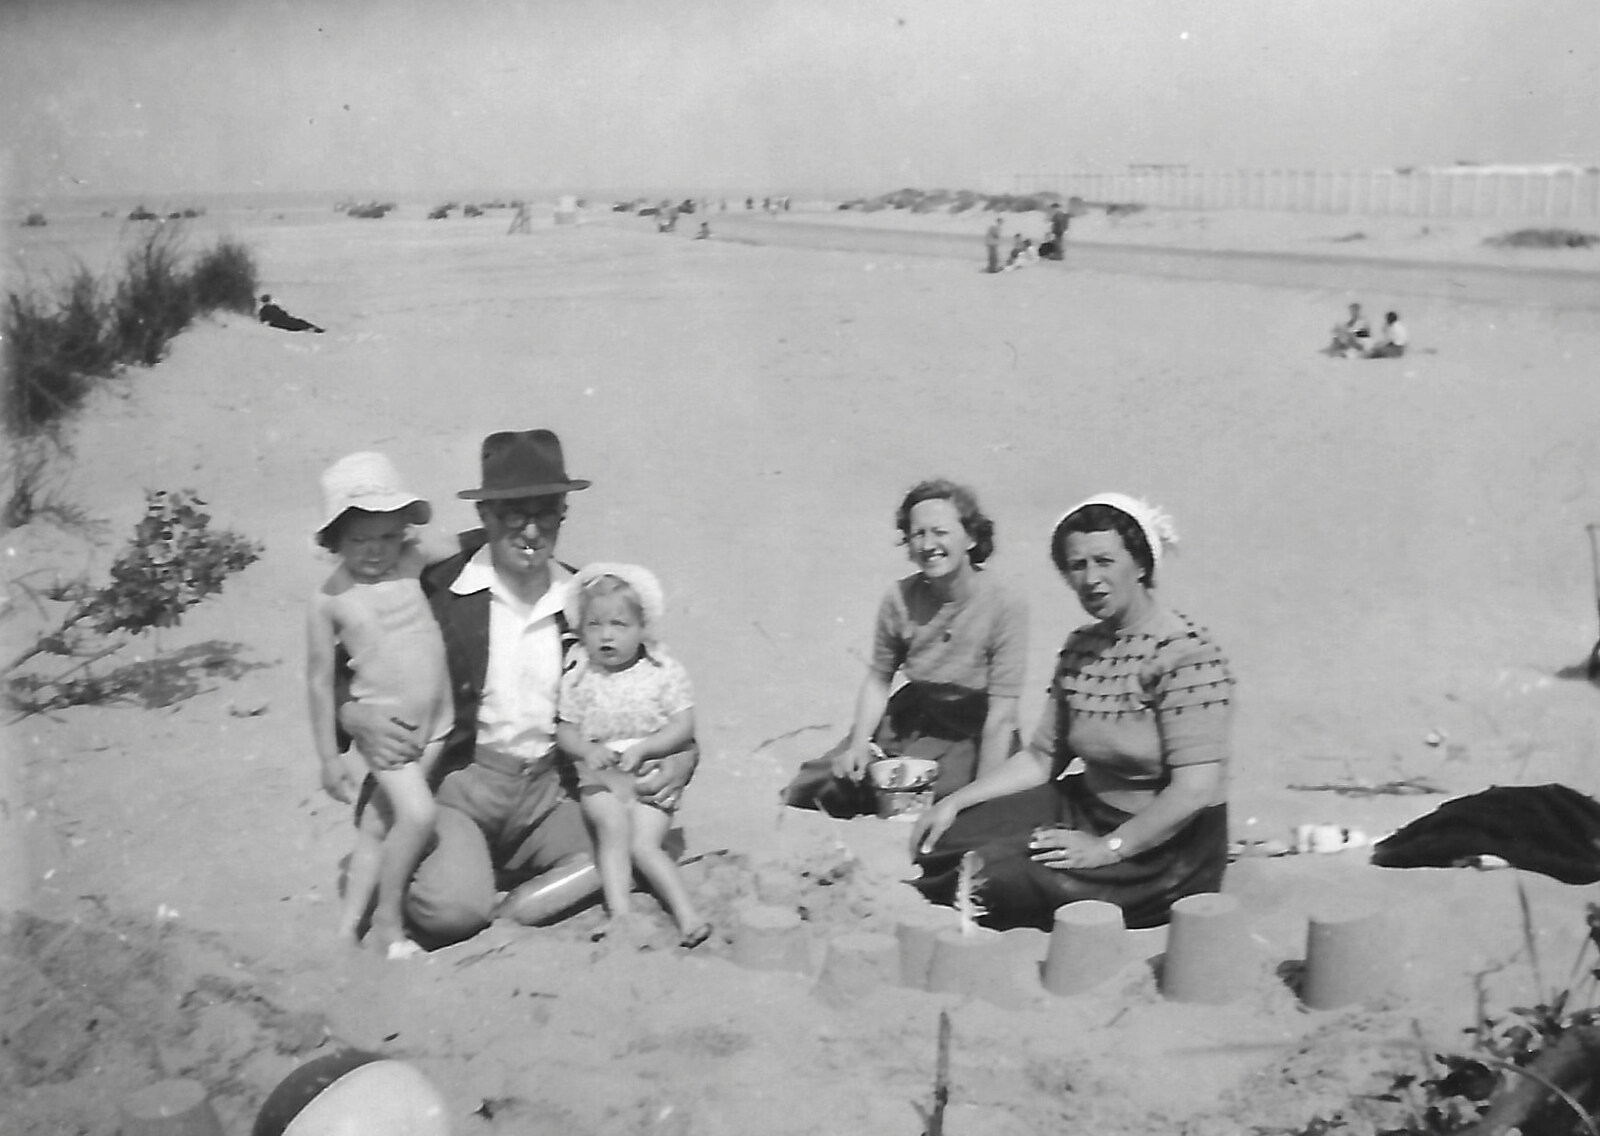 On the beach at Southport from Family History: The 1940s and 1950s - 24th January 2020